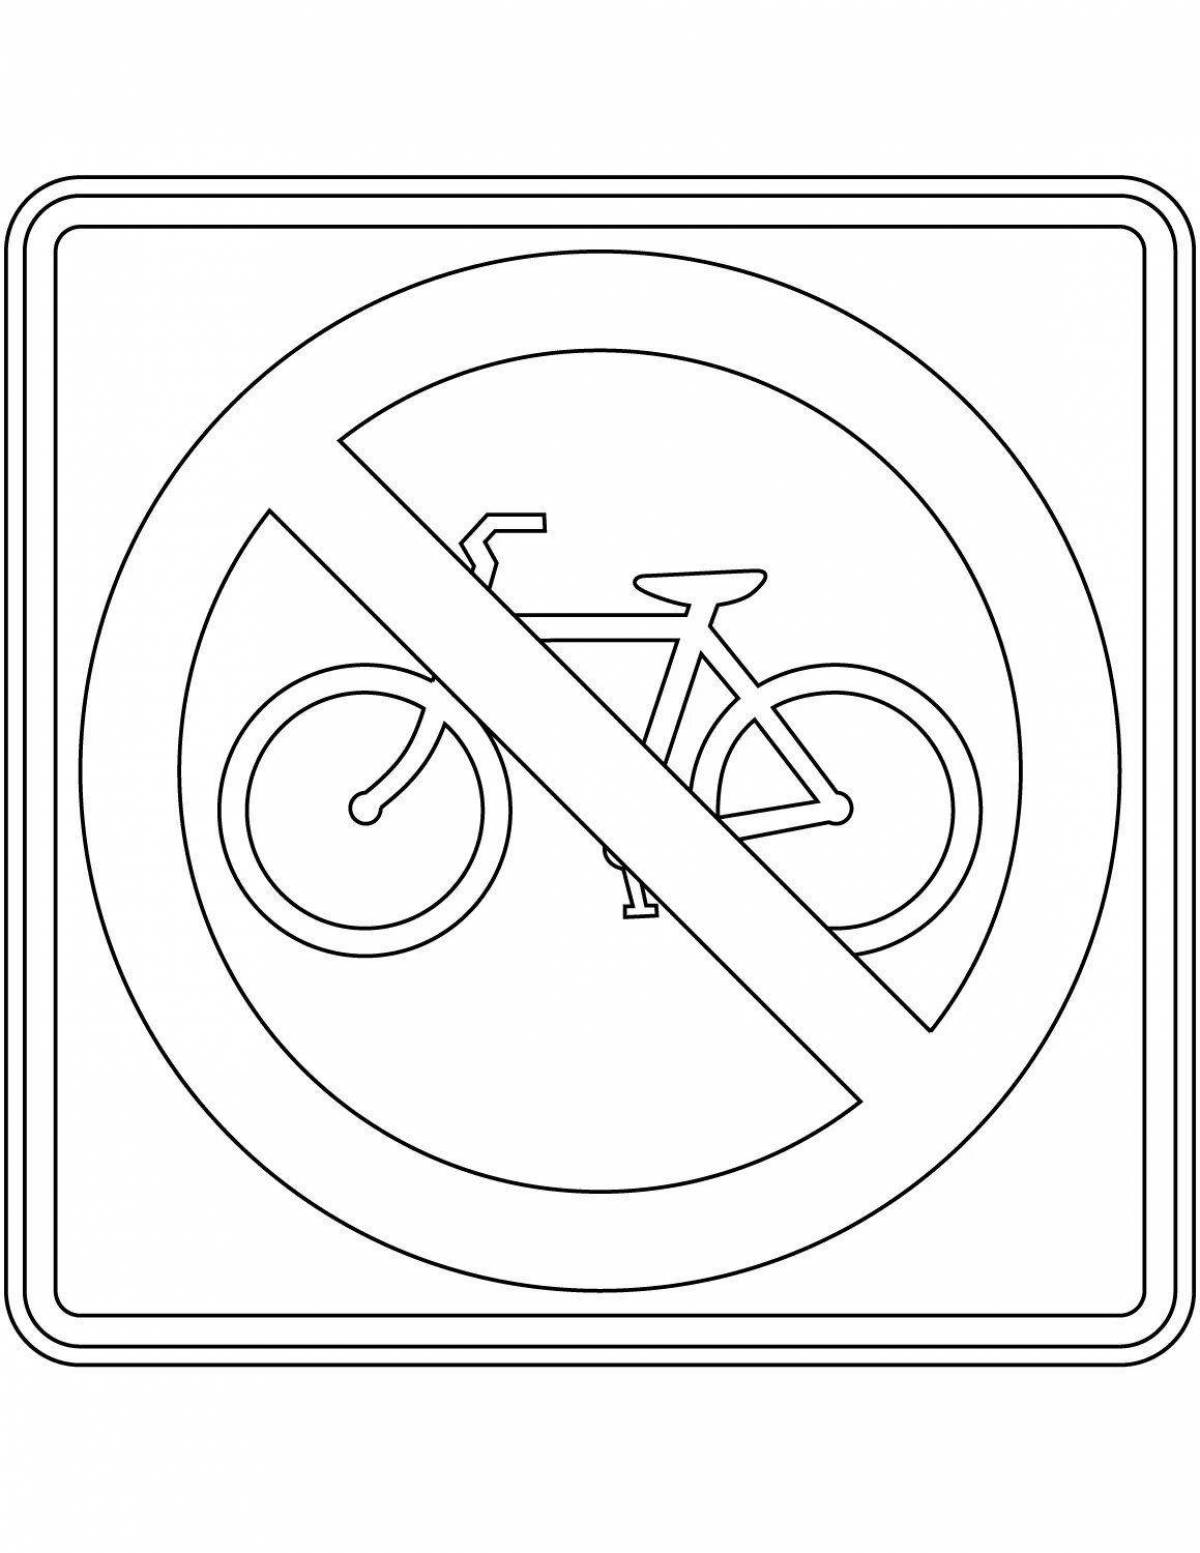 Coloring page magic horn forbidden traffic sign